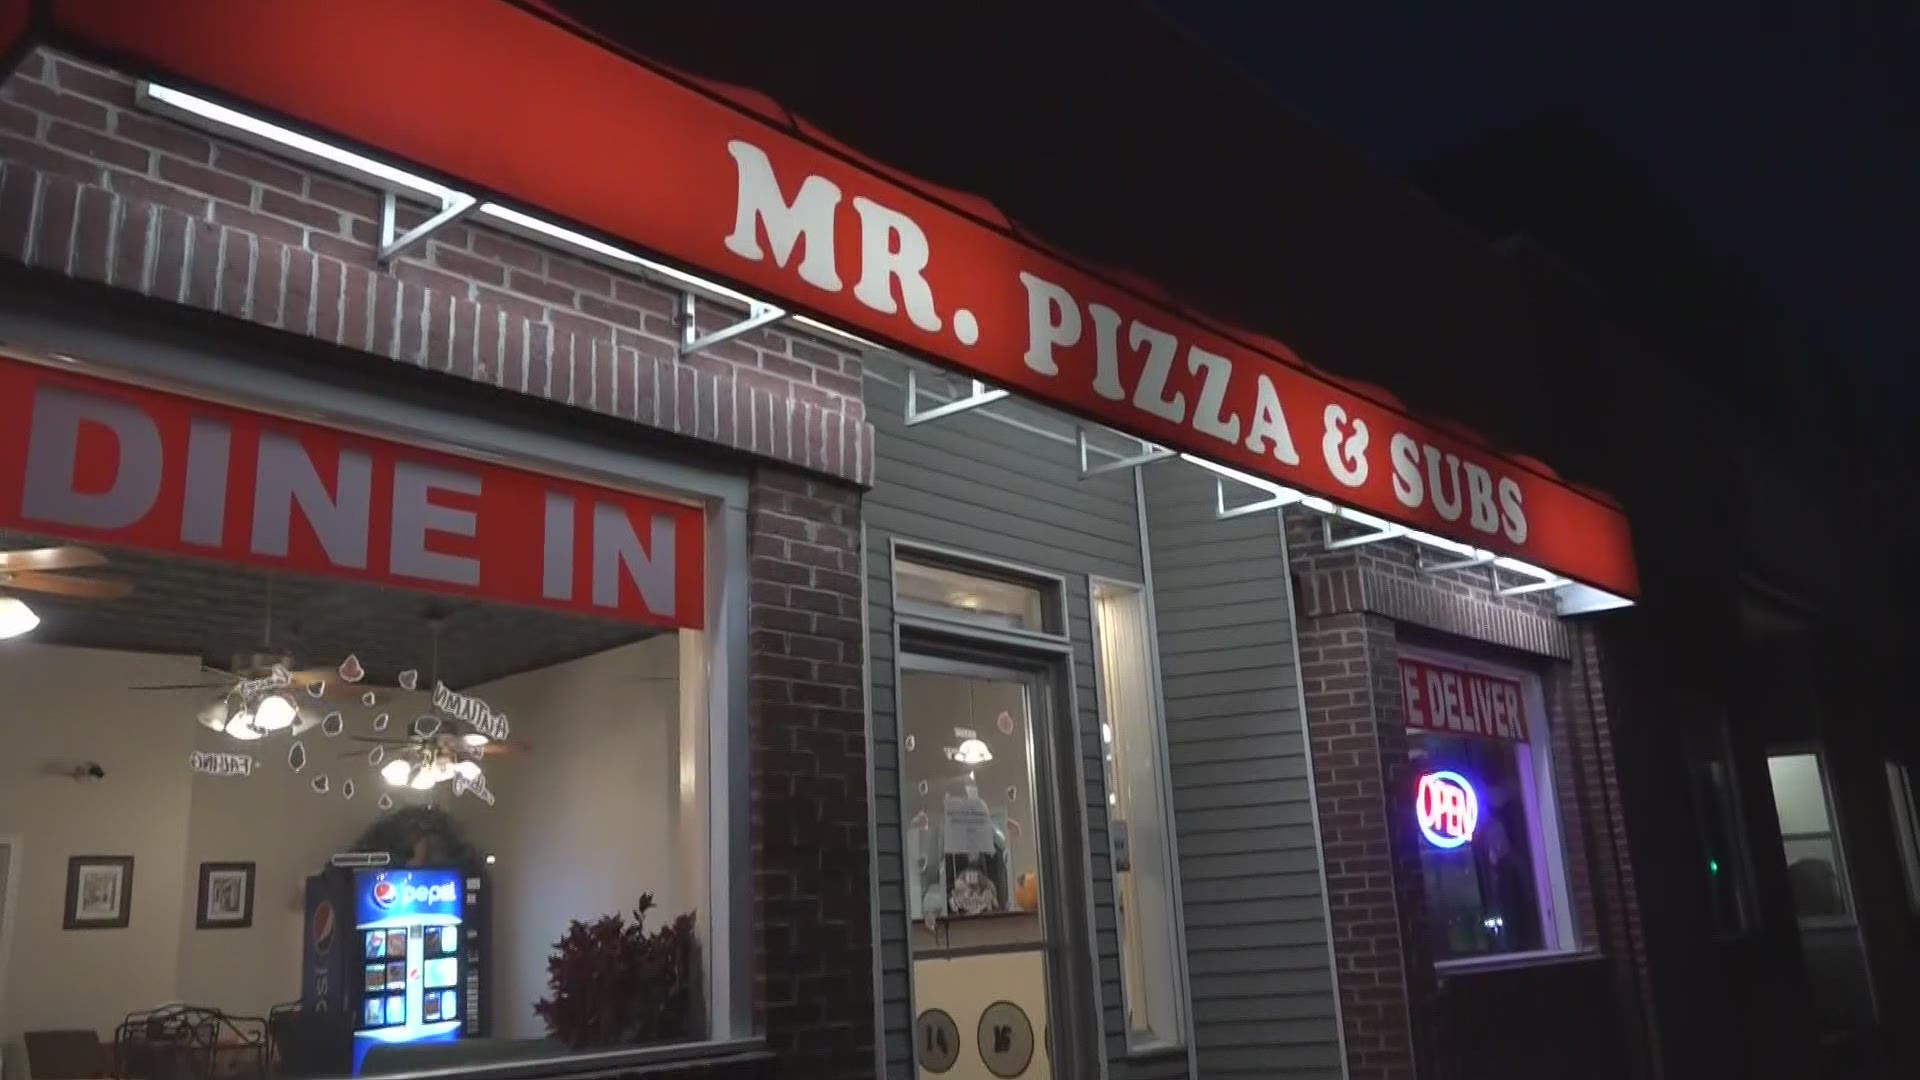 Mr. Pizza's delivery on "National Pizza Day" marked the latest donation for a restaurant that's proved itself charitable during the pandemic.